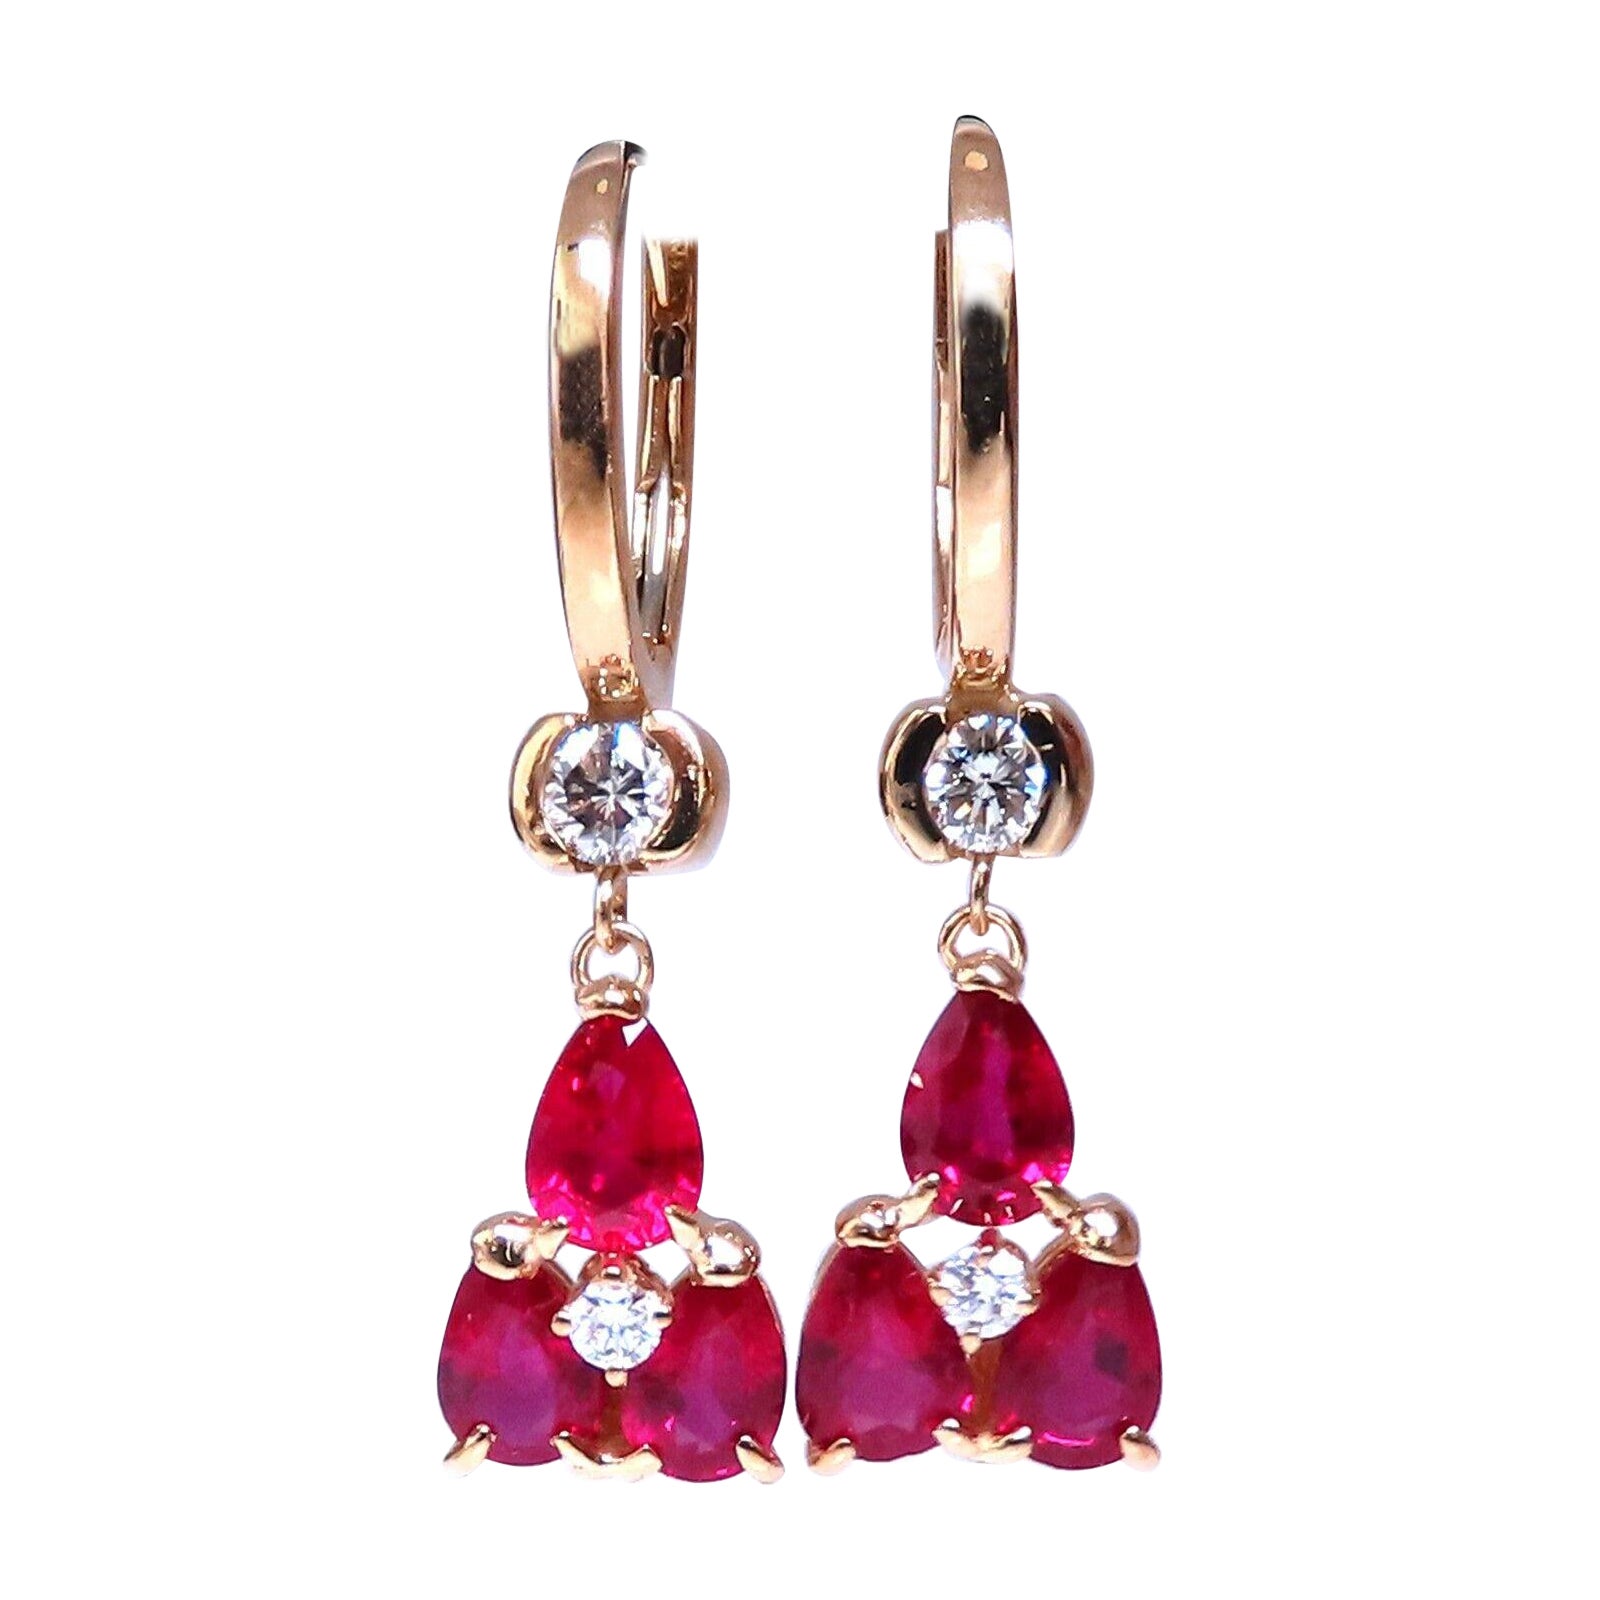 3ct Natural Ruby Diamonds Cluster Earrings 14kt Gold For Sale